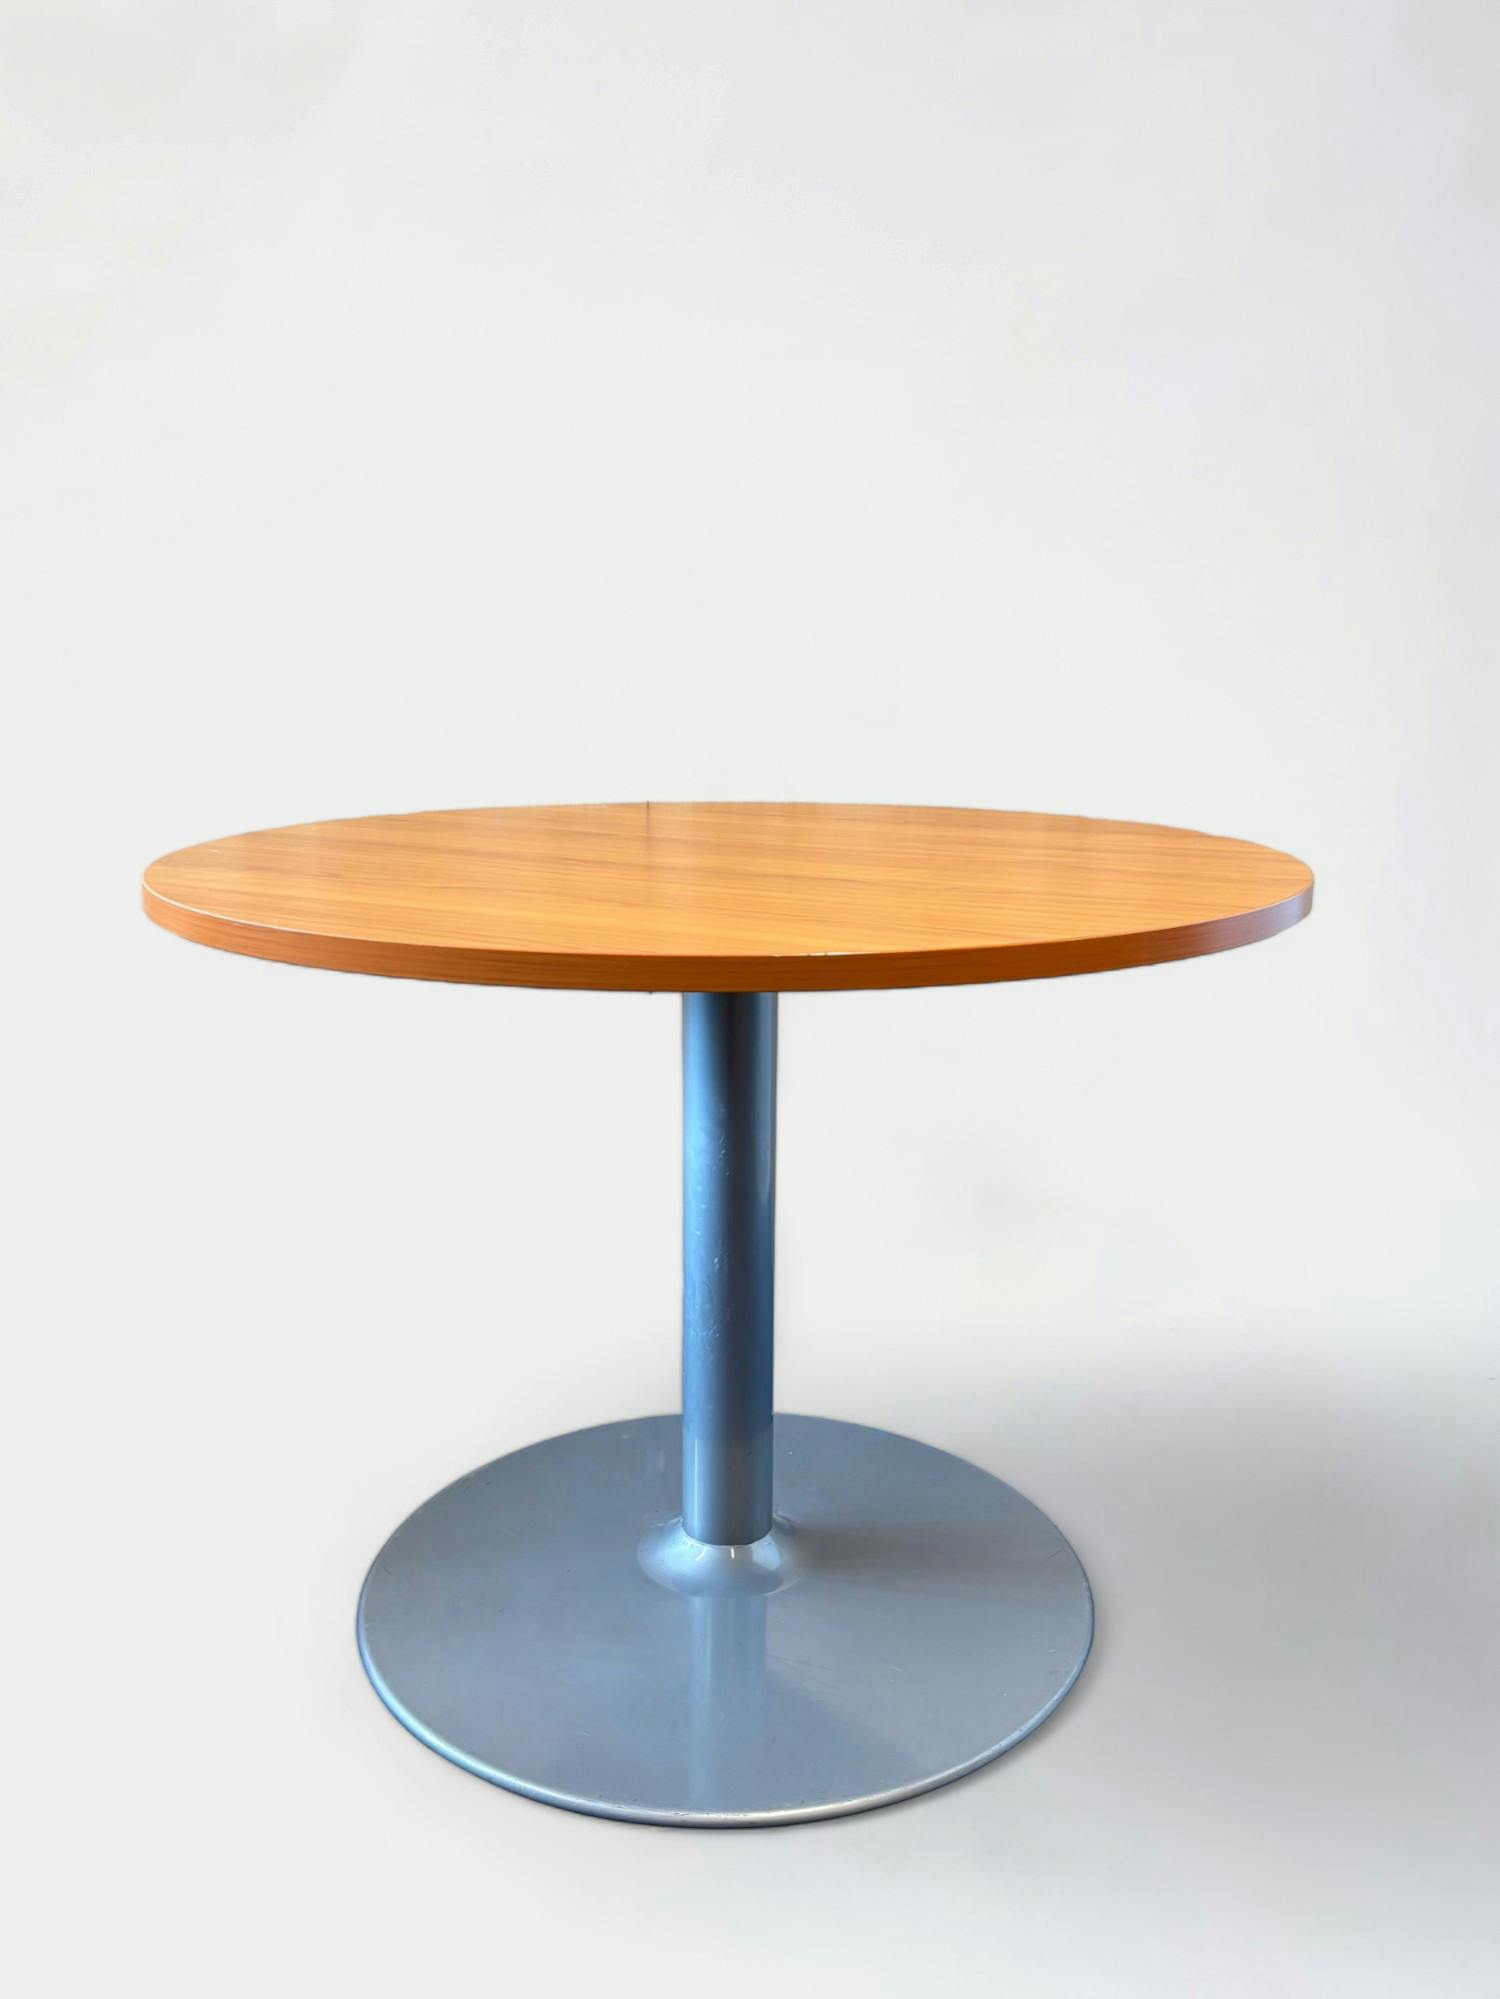 Warm Honey Wood Round Meeting Table with Metal Base - Relieve Furniture